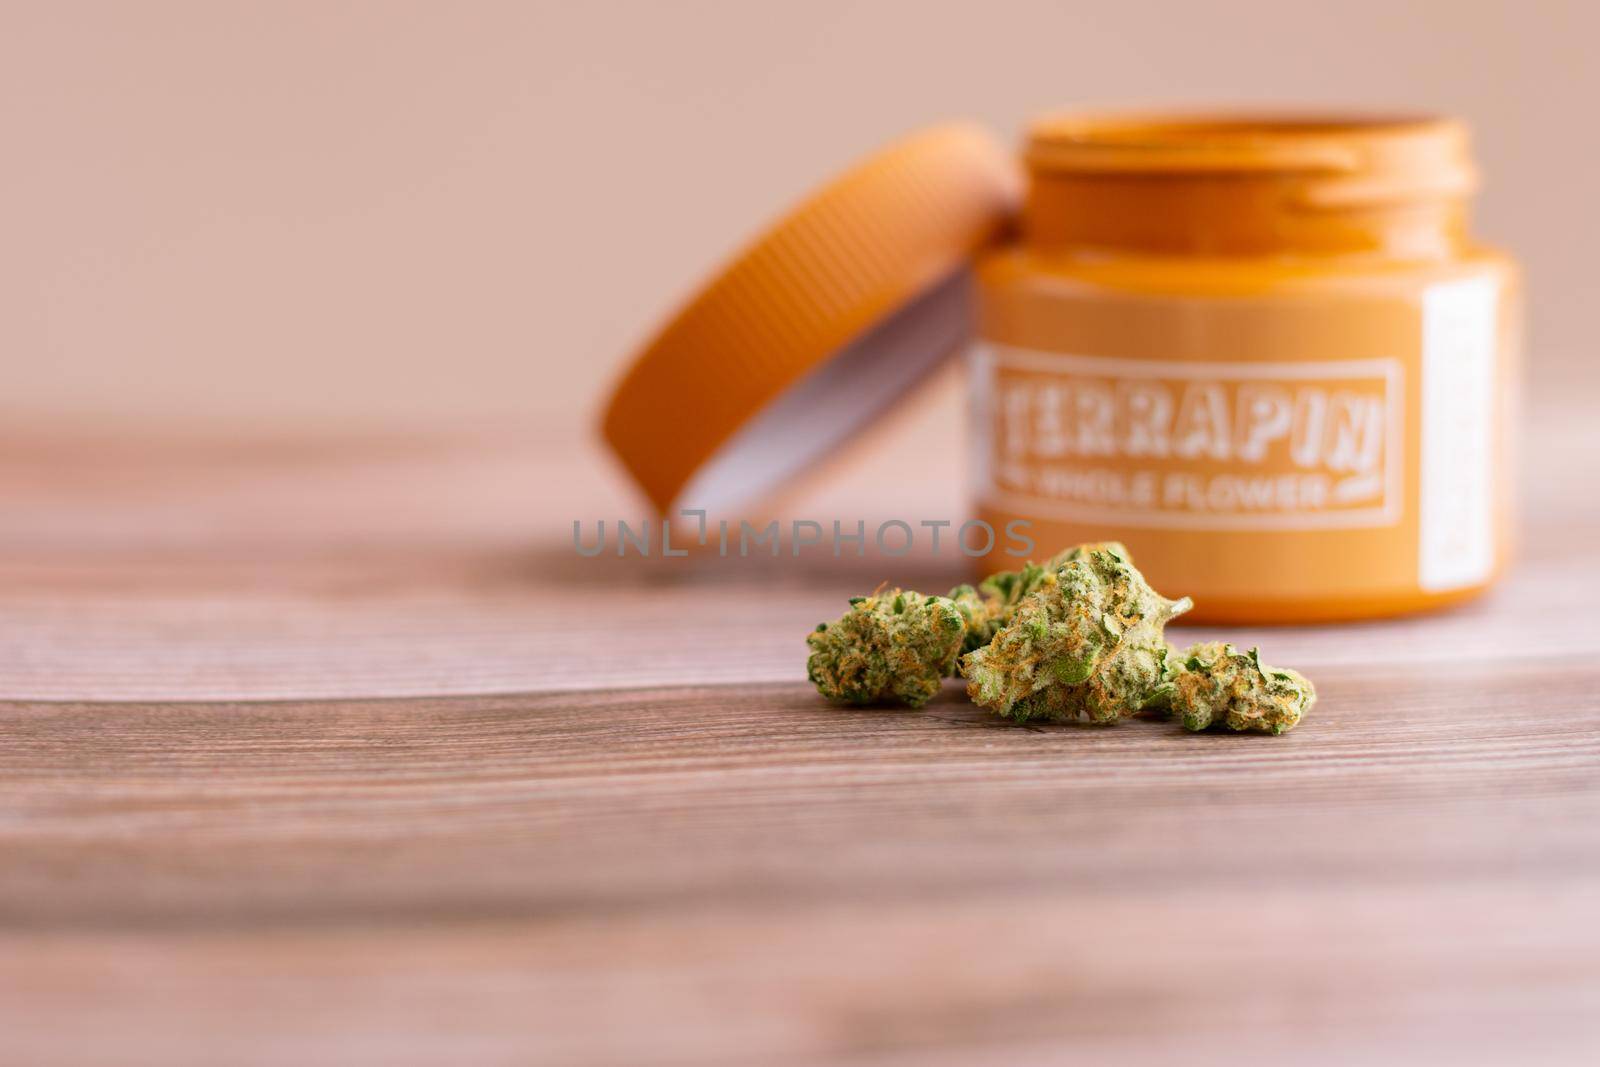 PHILADELPHIA, PA - FEBRUARY 23 2021: Devil's Lemons Medicinal Cannabis With an Orange Terrapin Whole Flower Dispensary Jar With the Lid Off Behind It